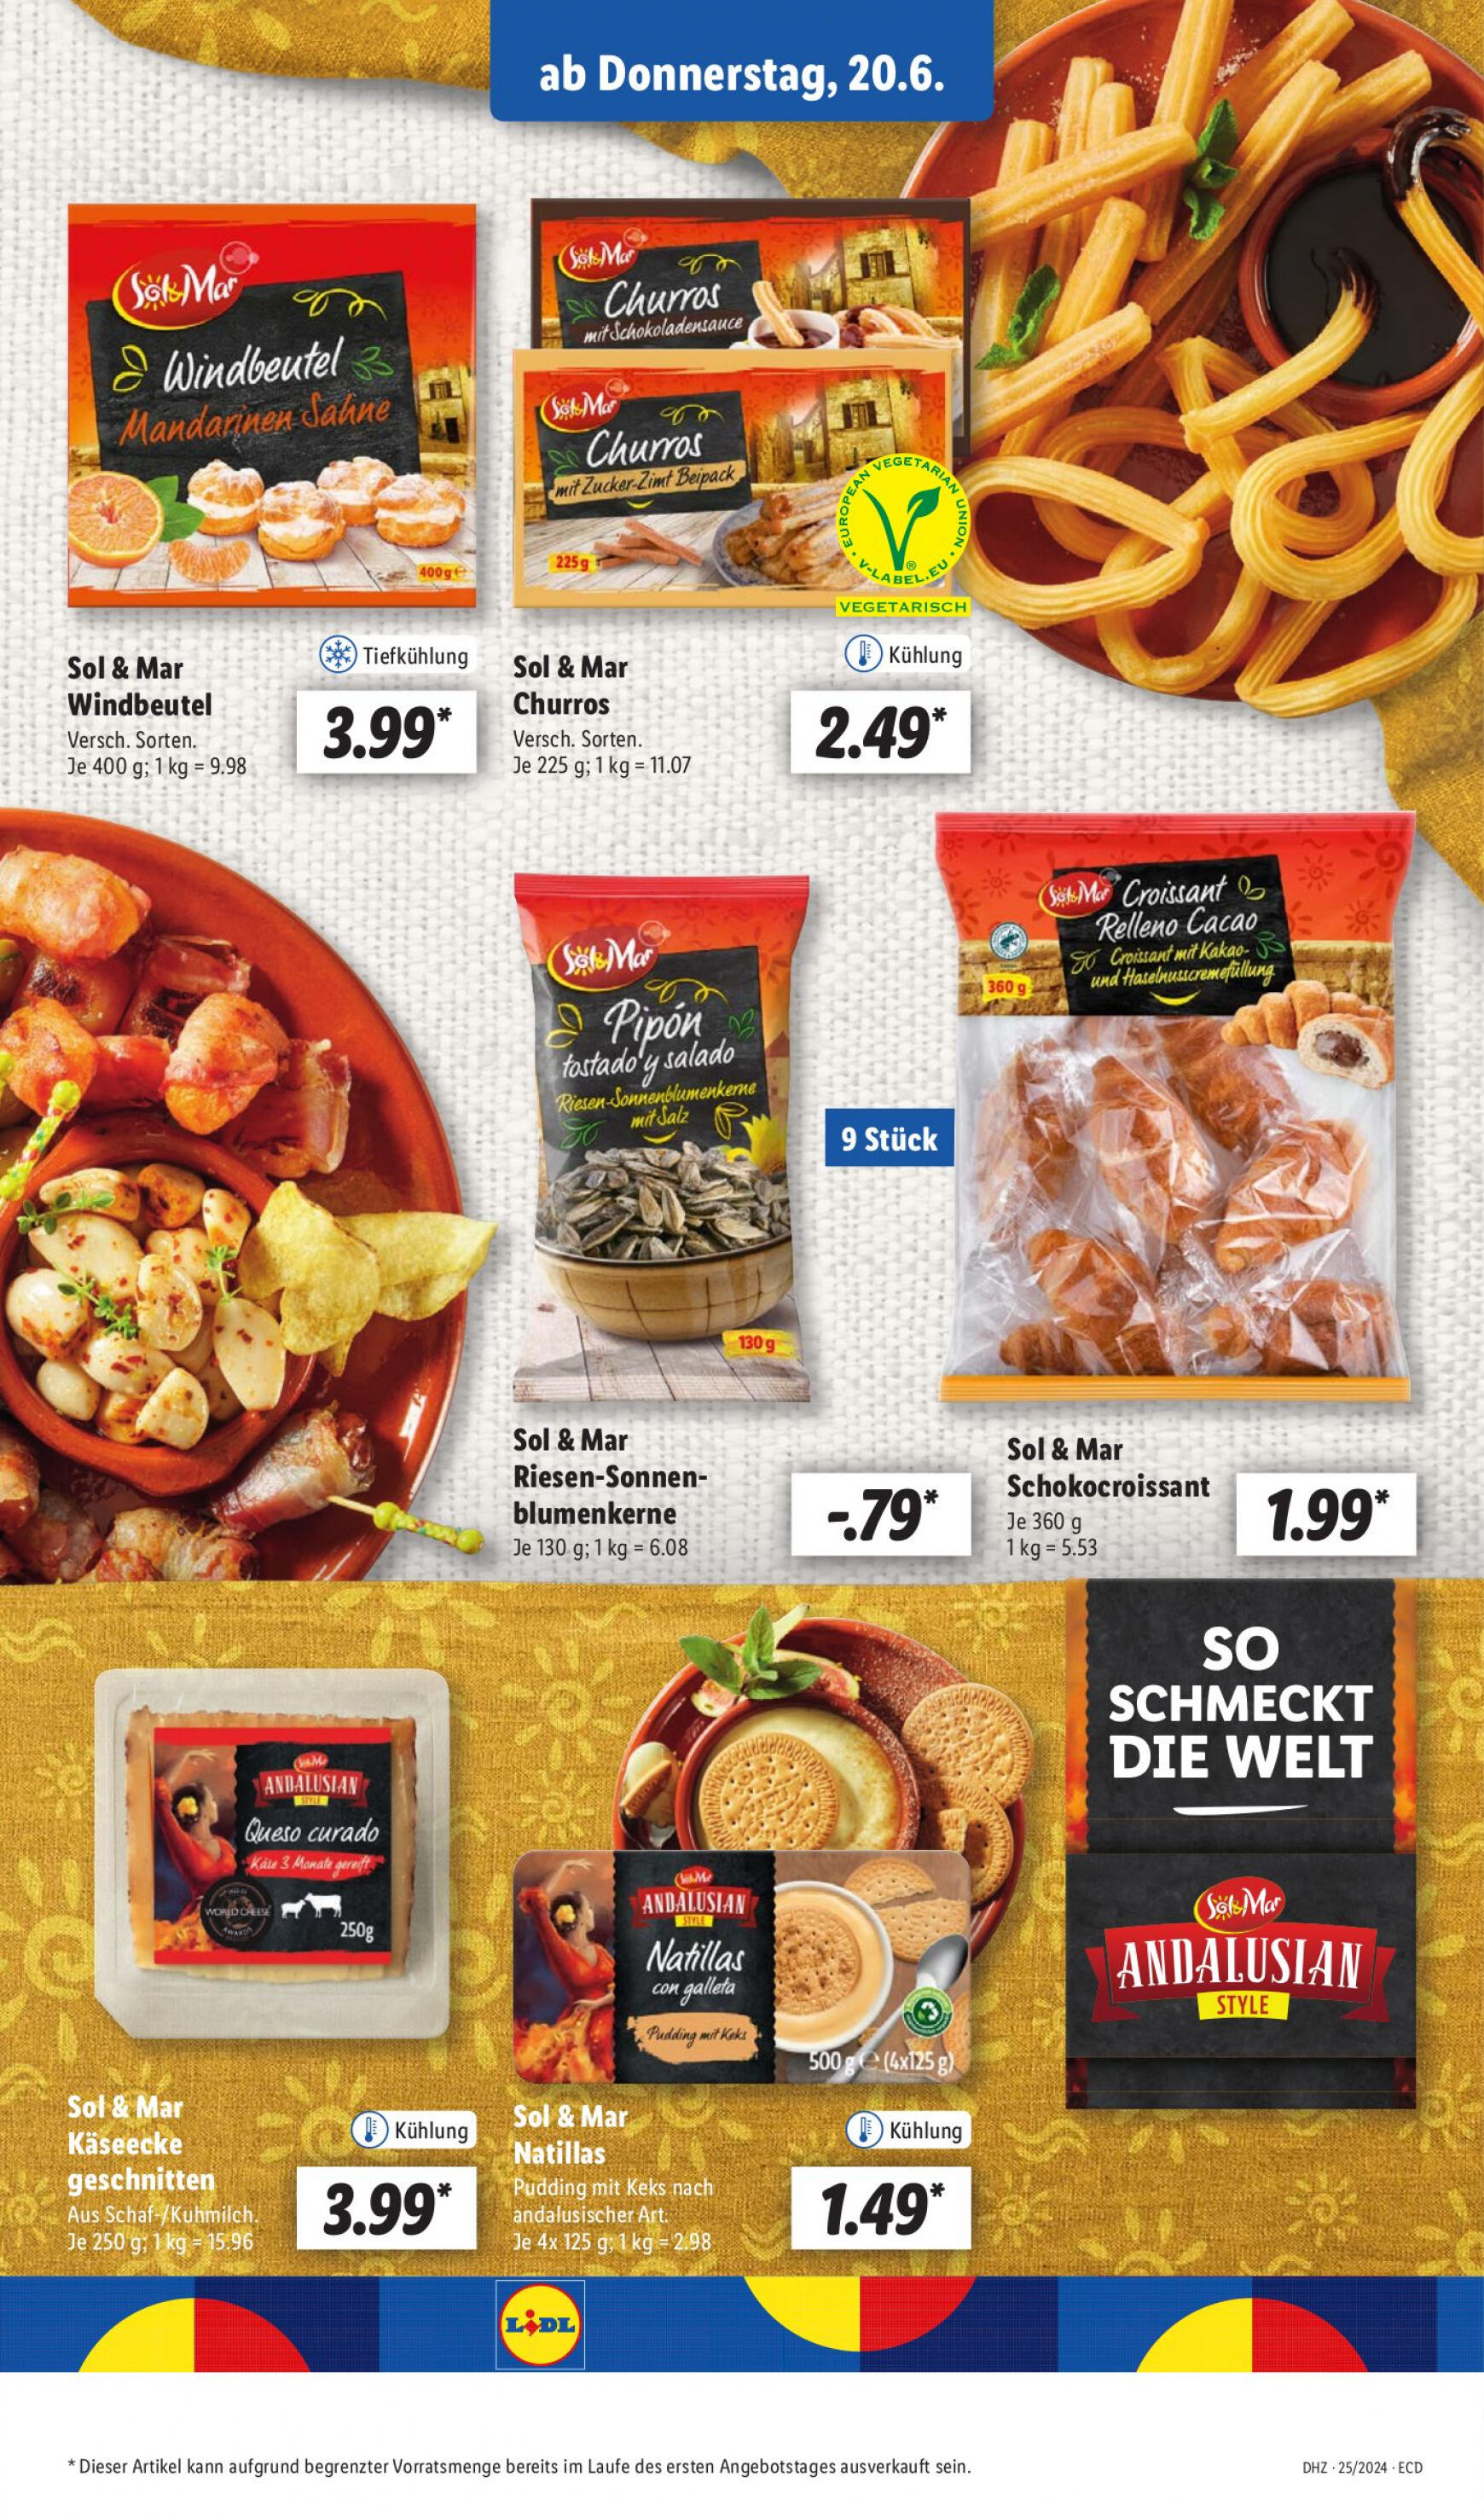 lidl - Flyer Lidl aktuell 17.06. - 22.06. - page: 47